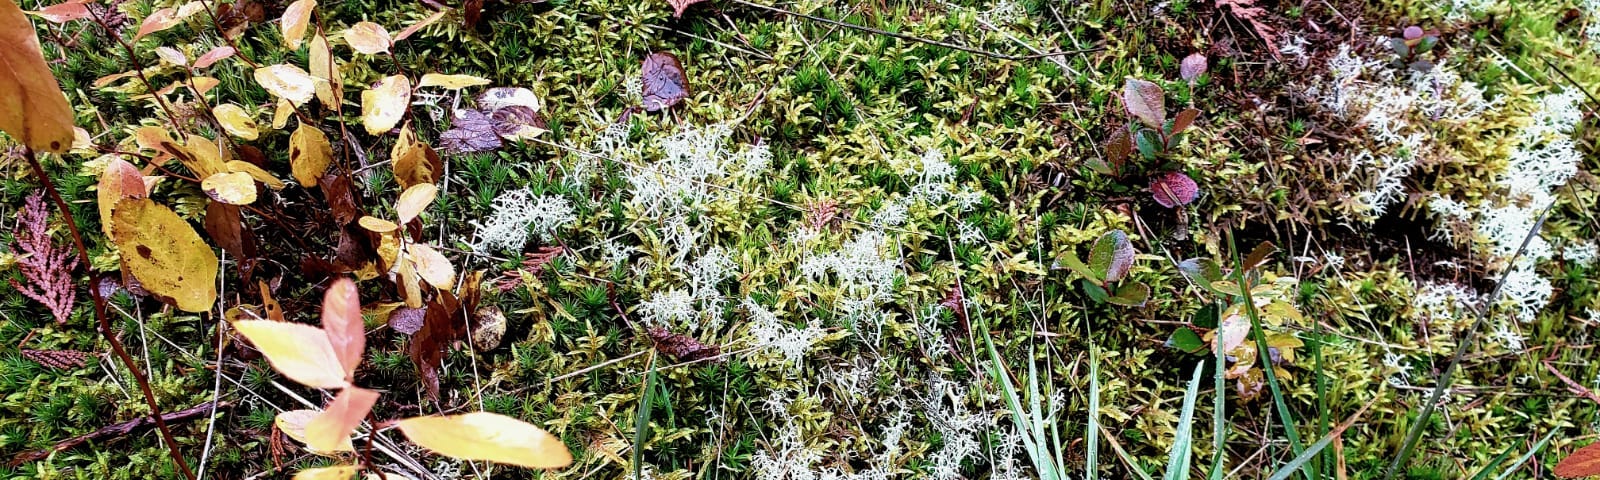 Photo of green moss, covered with white moss or lichen, with leaves growing nearby, leaves in colours ranging from yellow to orange to red. Long blades of green grass sprout up at the bottom of the photo in two bunches. Dried pieces of brown cedar, and dried tree needles lay atop the moss, having fallen from their trees in the autumn.